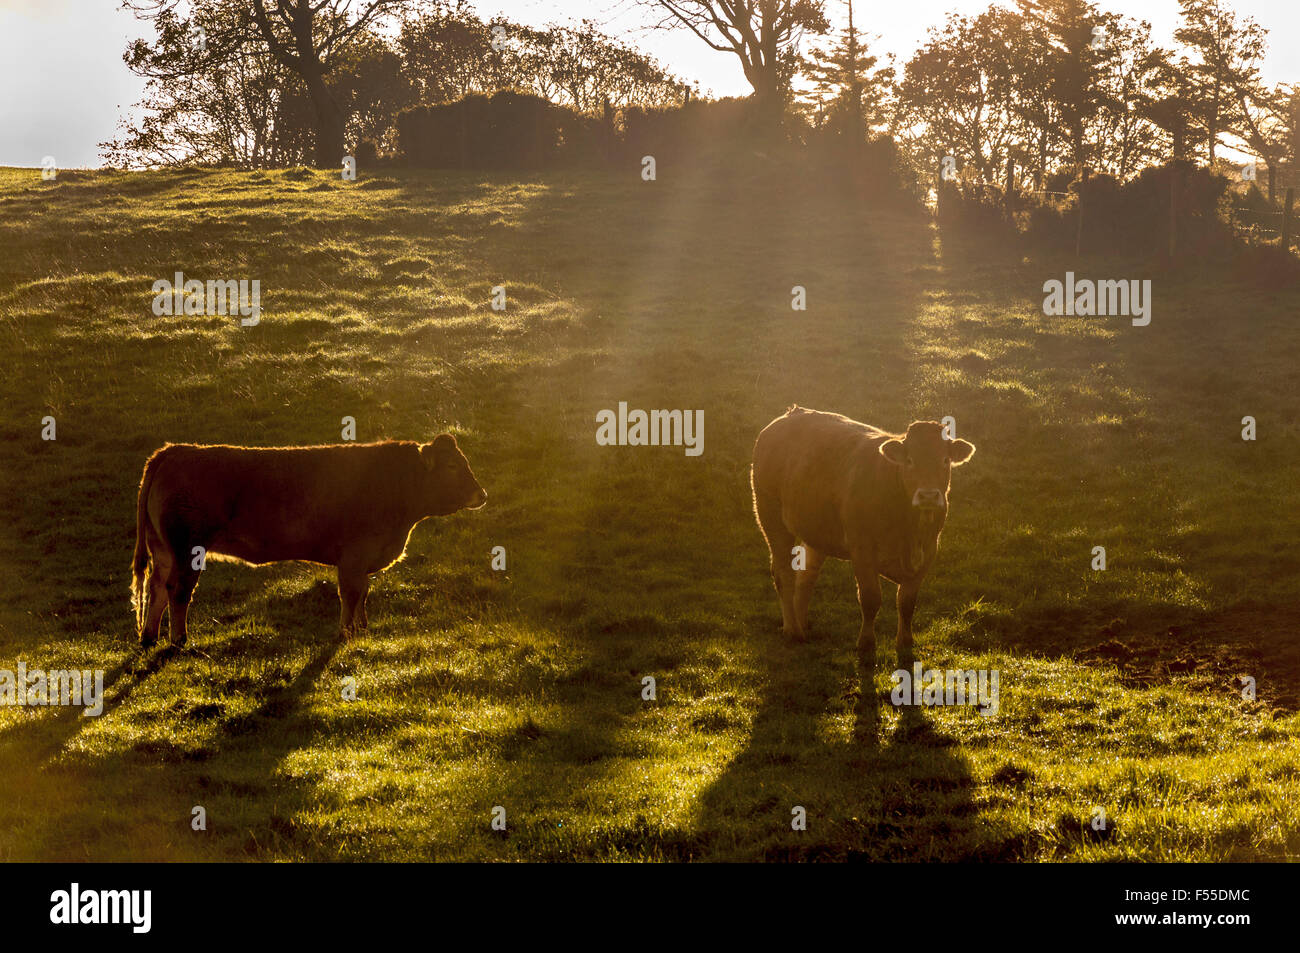 Ardara, County Donegal. Ireland. 28th October 2015. Beef cattle on a farm. Canada has reopened its market to Irish and European beef, 19 years after it blocked all imports because of mad cow disease. The deal comes in the wake of Ireland being granted access to beef markets in the US, China and Japan, which had also been closed since the infamous BSE crisis of the 1990s. Photo by:Richard Wayman Stock Photo